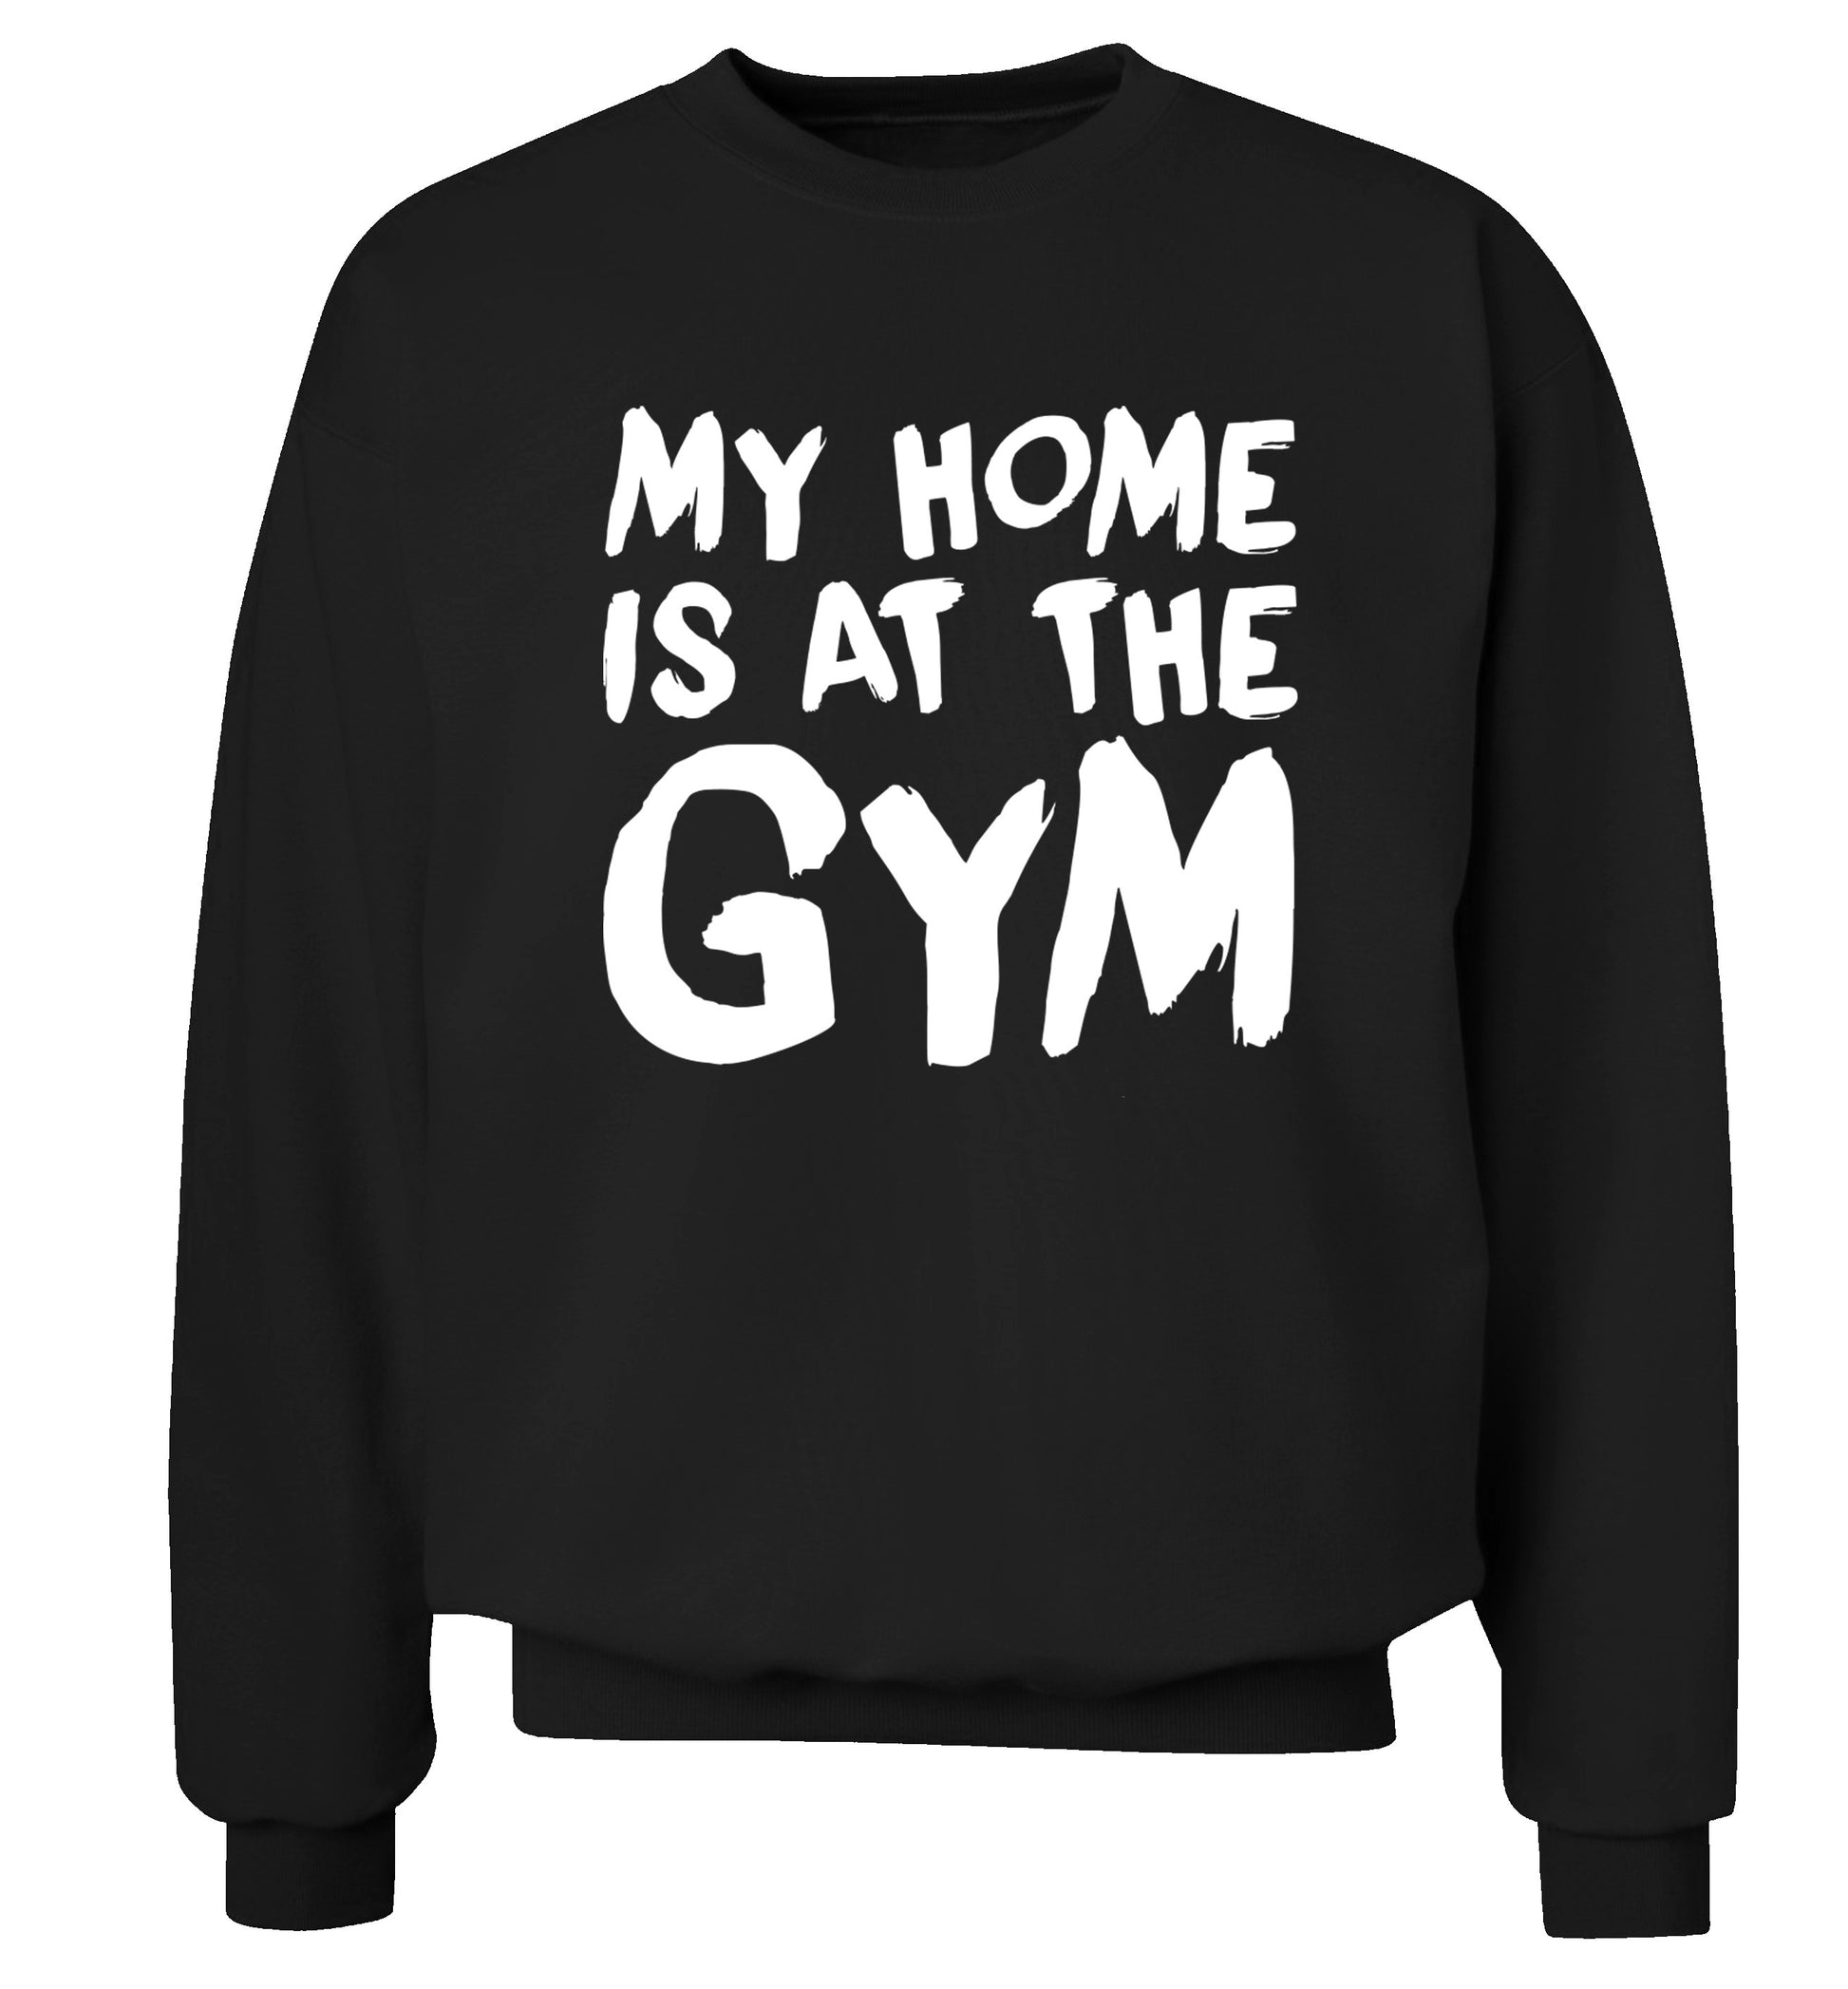 My home is at the gym Adult's unisex black Sweater 2XL